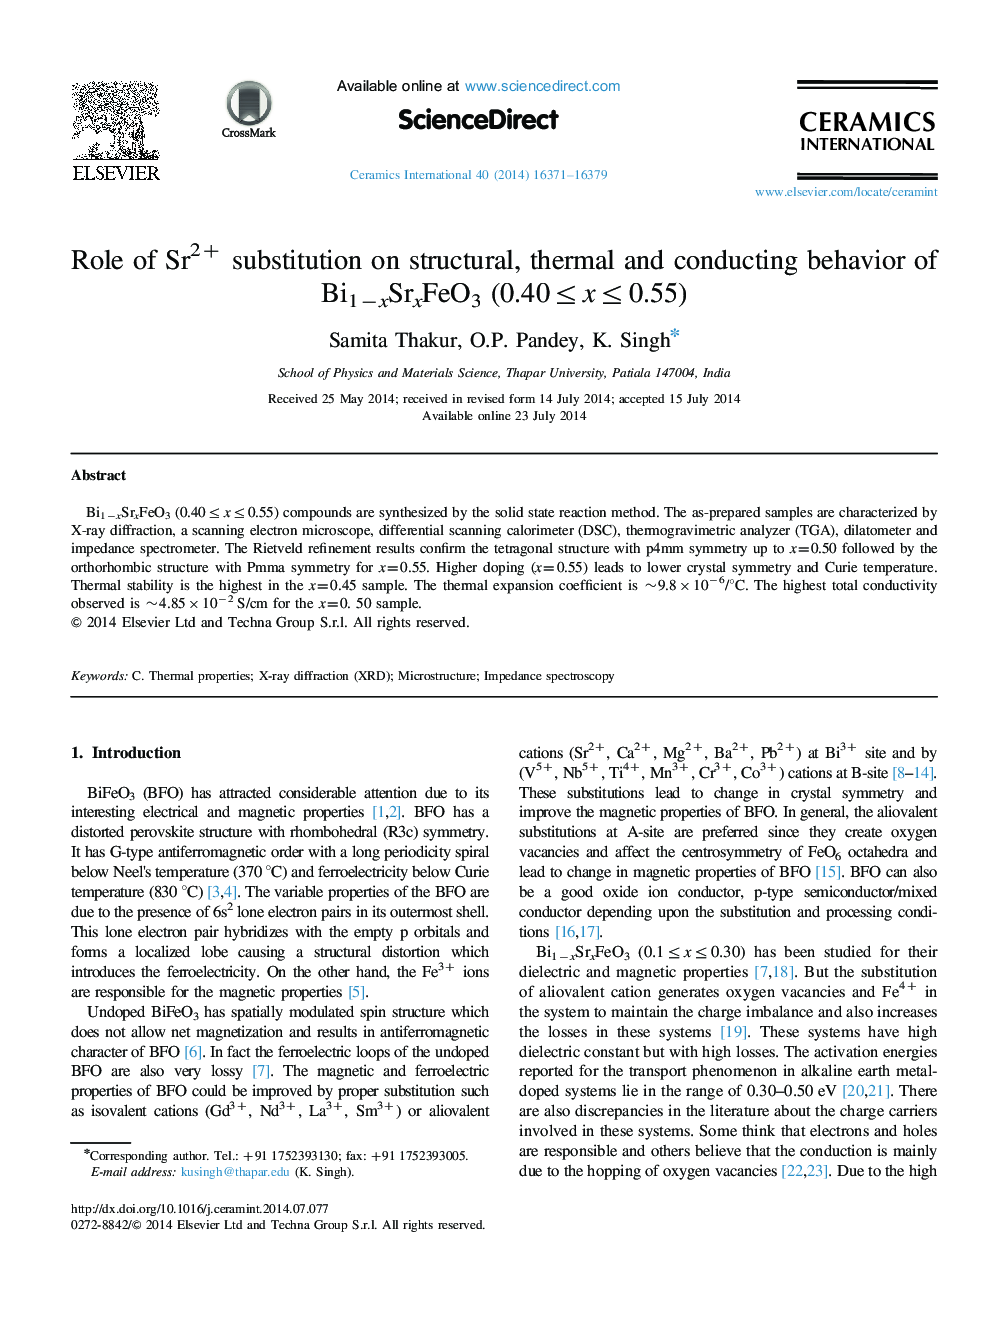 Role of Sr2+ substitution on structural, thermal and conducting behavior of Bi1−xSrxFeO3 (0.40≤x≤0.55)